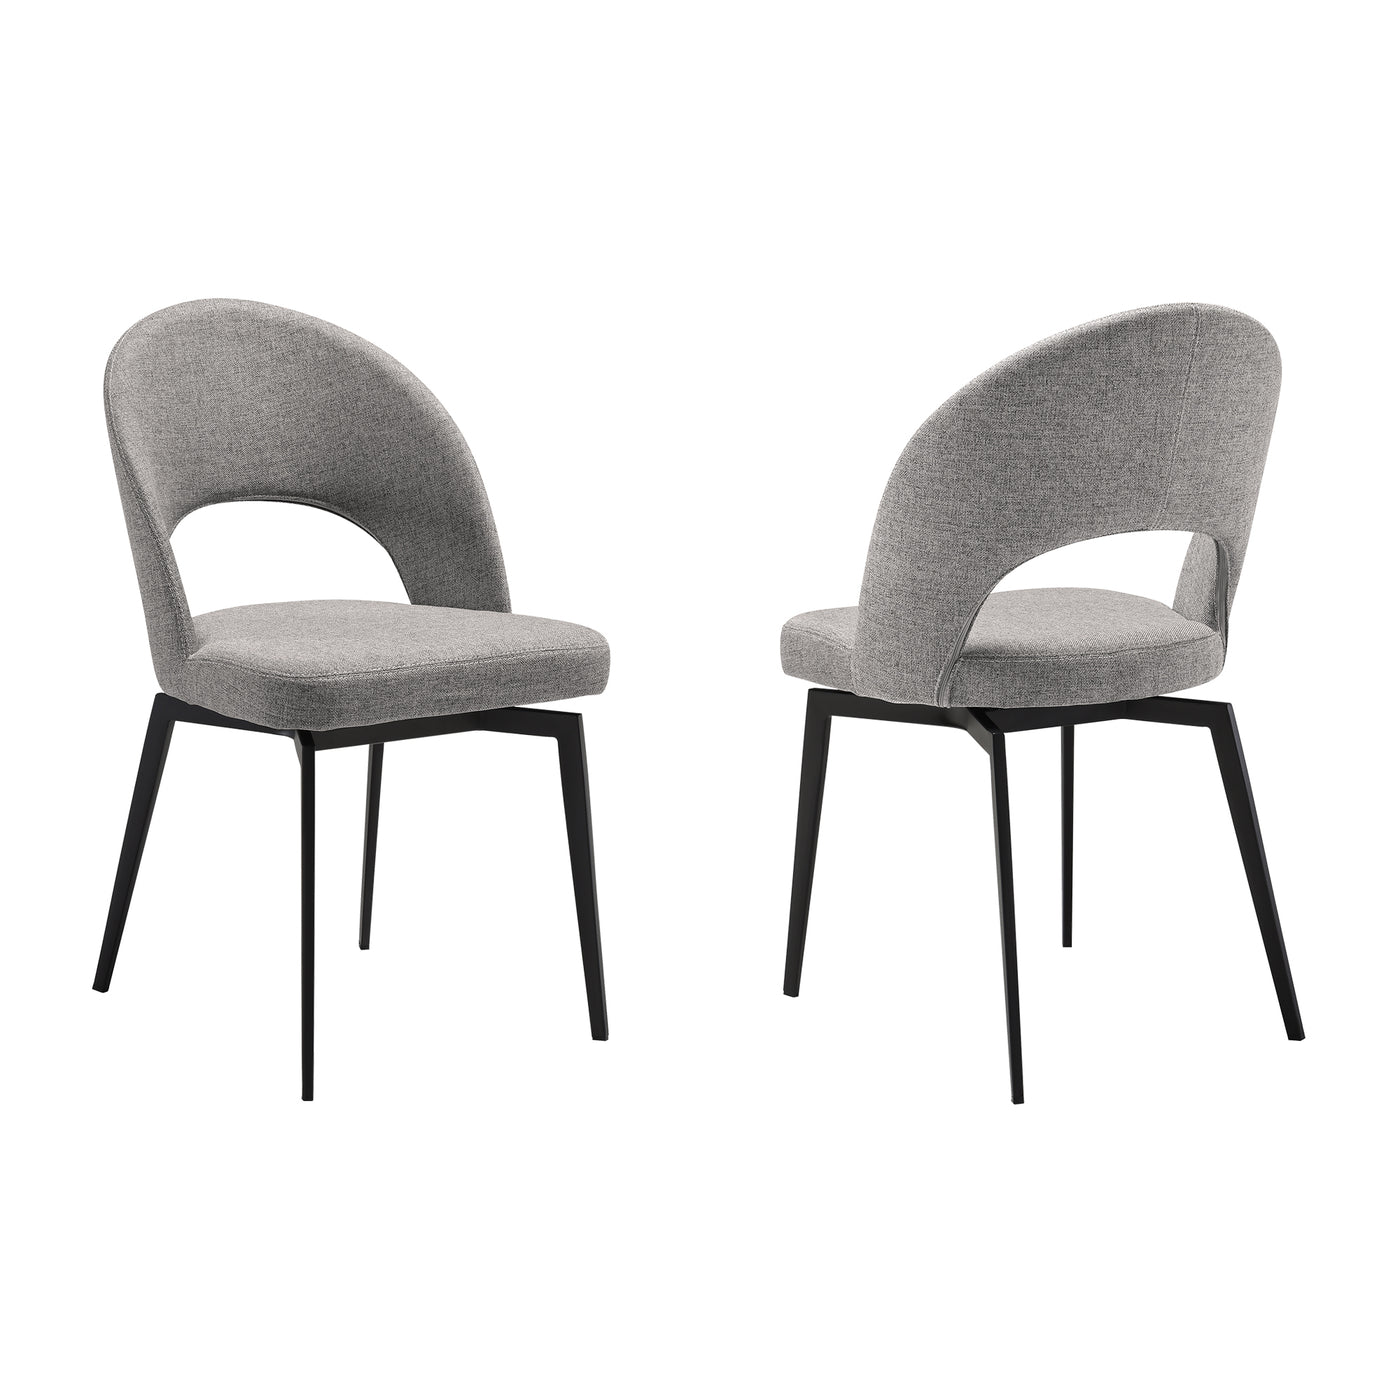 Lucia Swivel Upholstered Dining Chair Set of 2